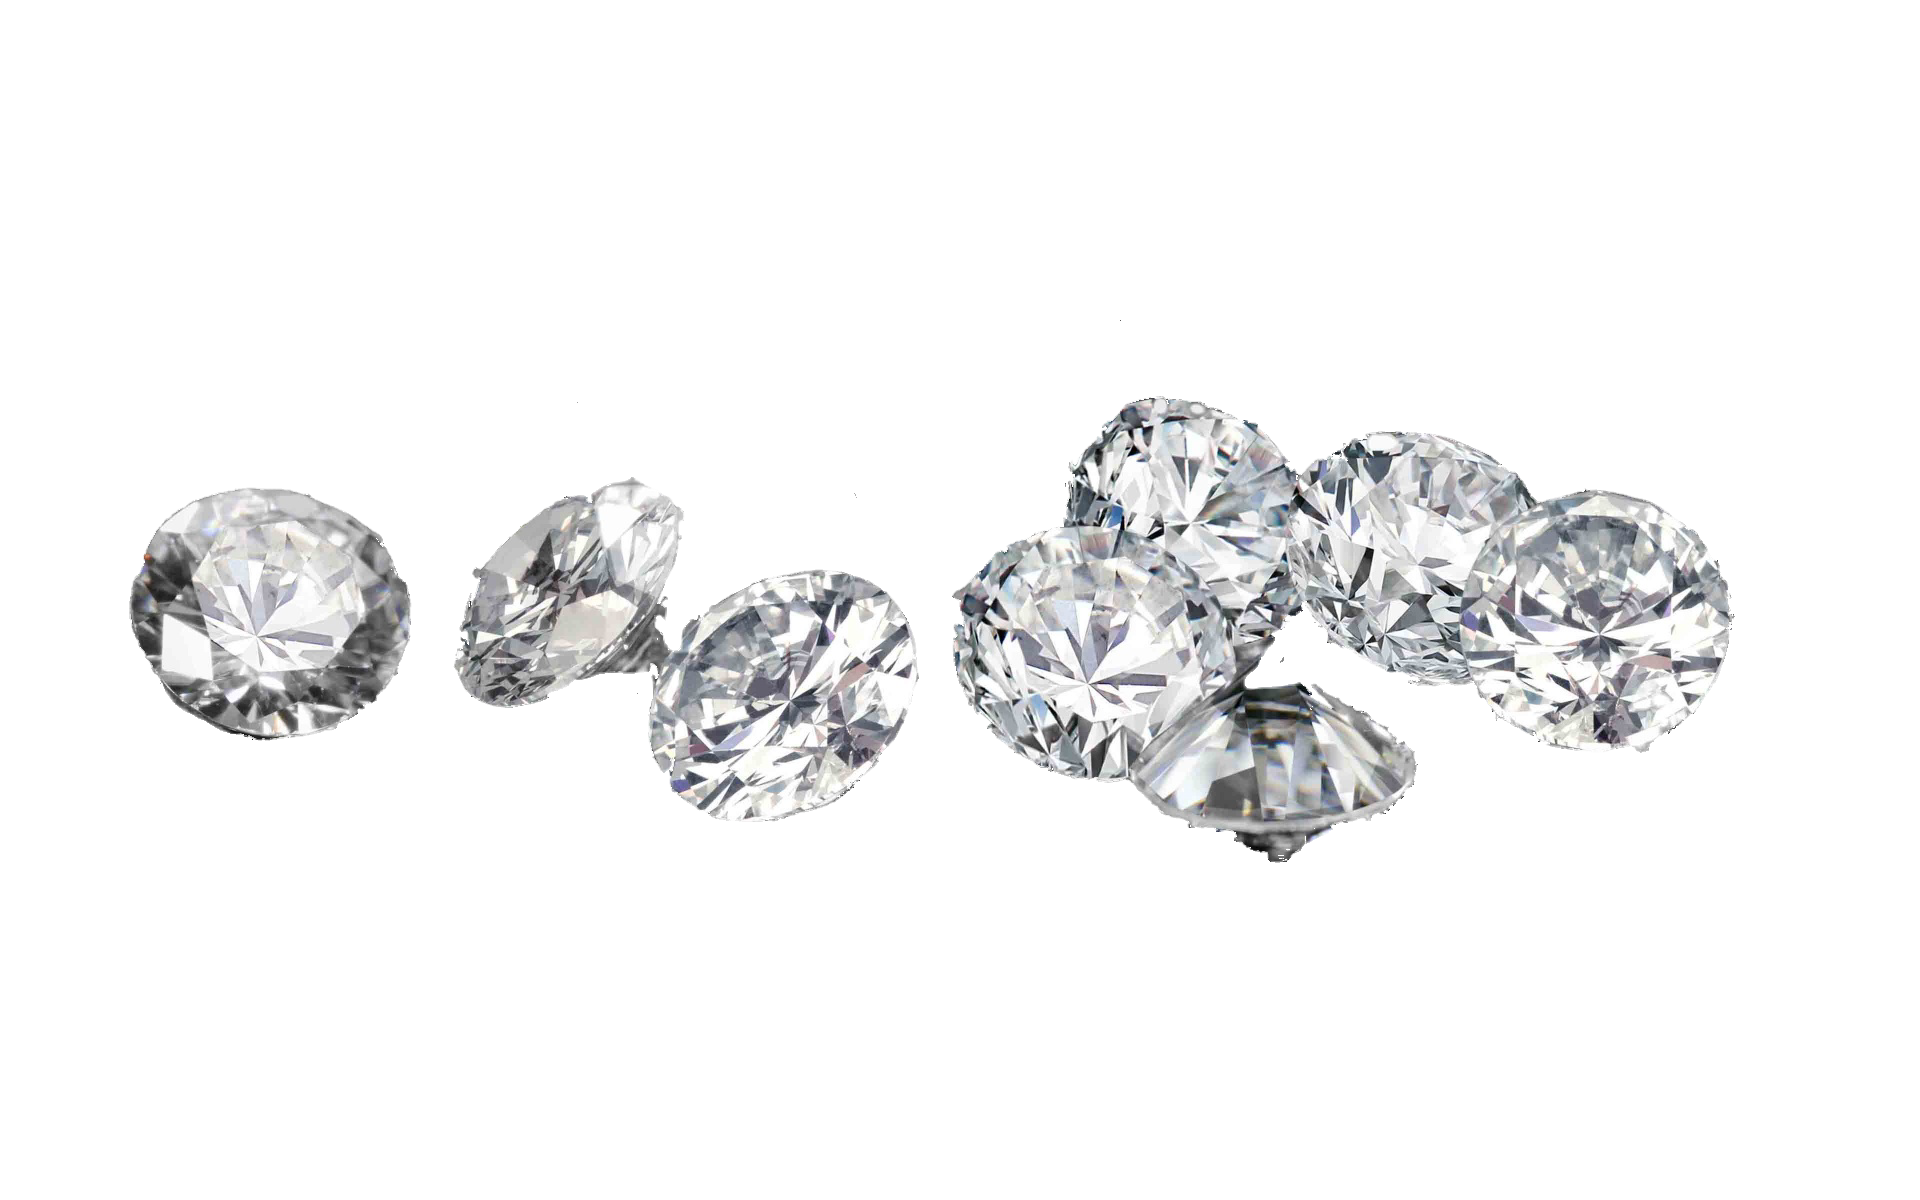 Loose Diamonds With Pictures